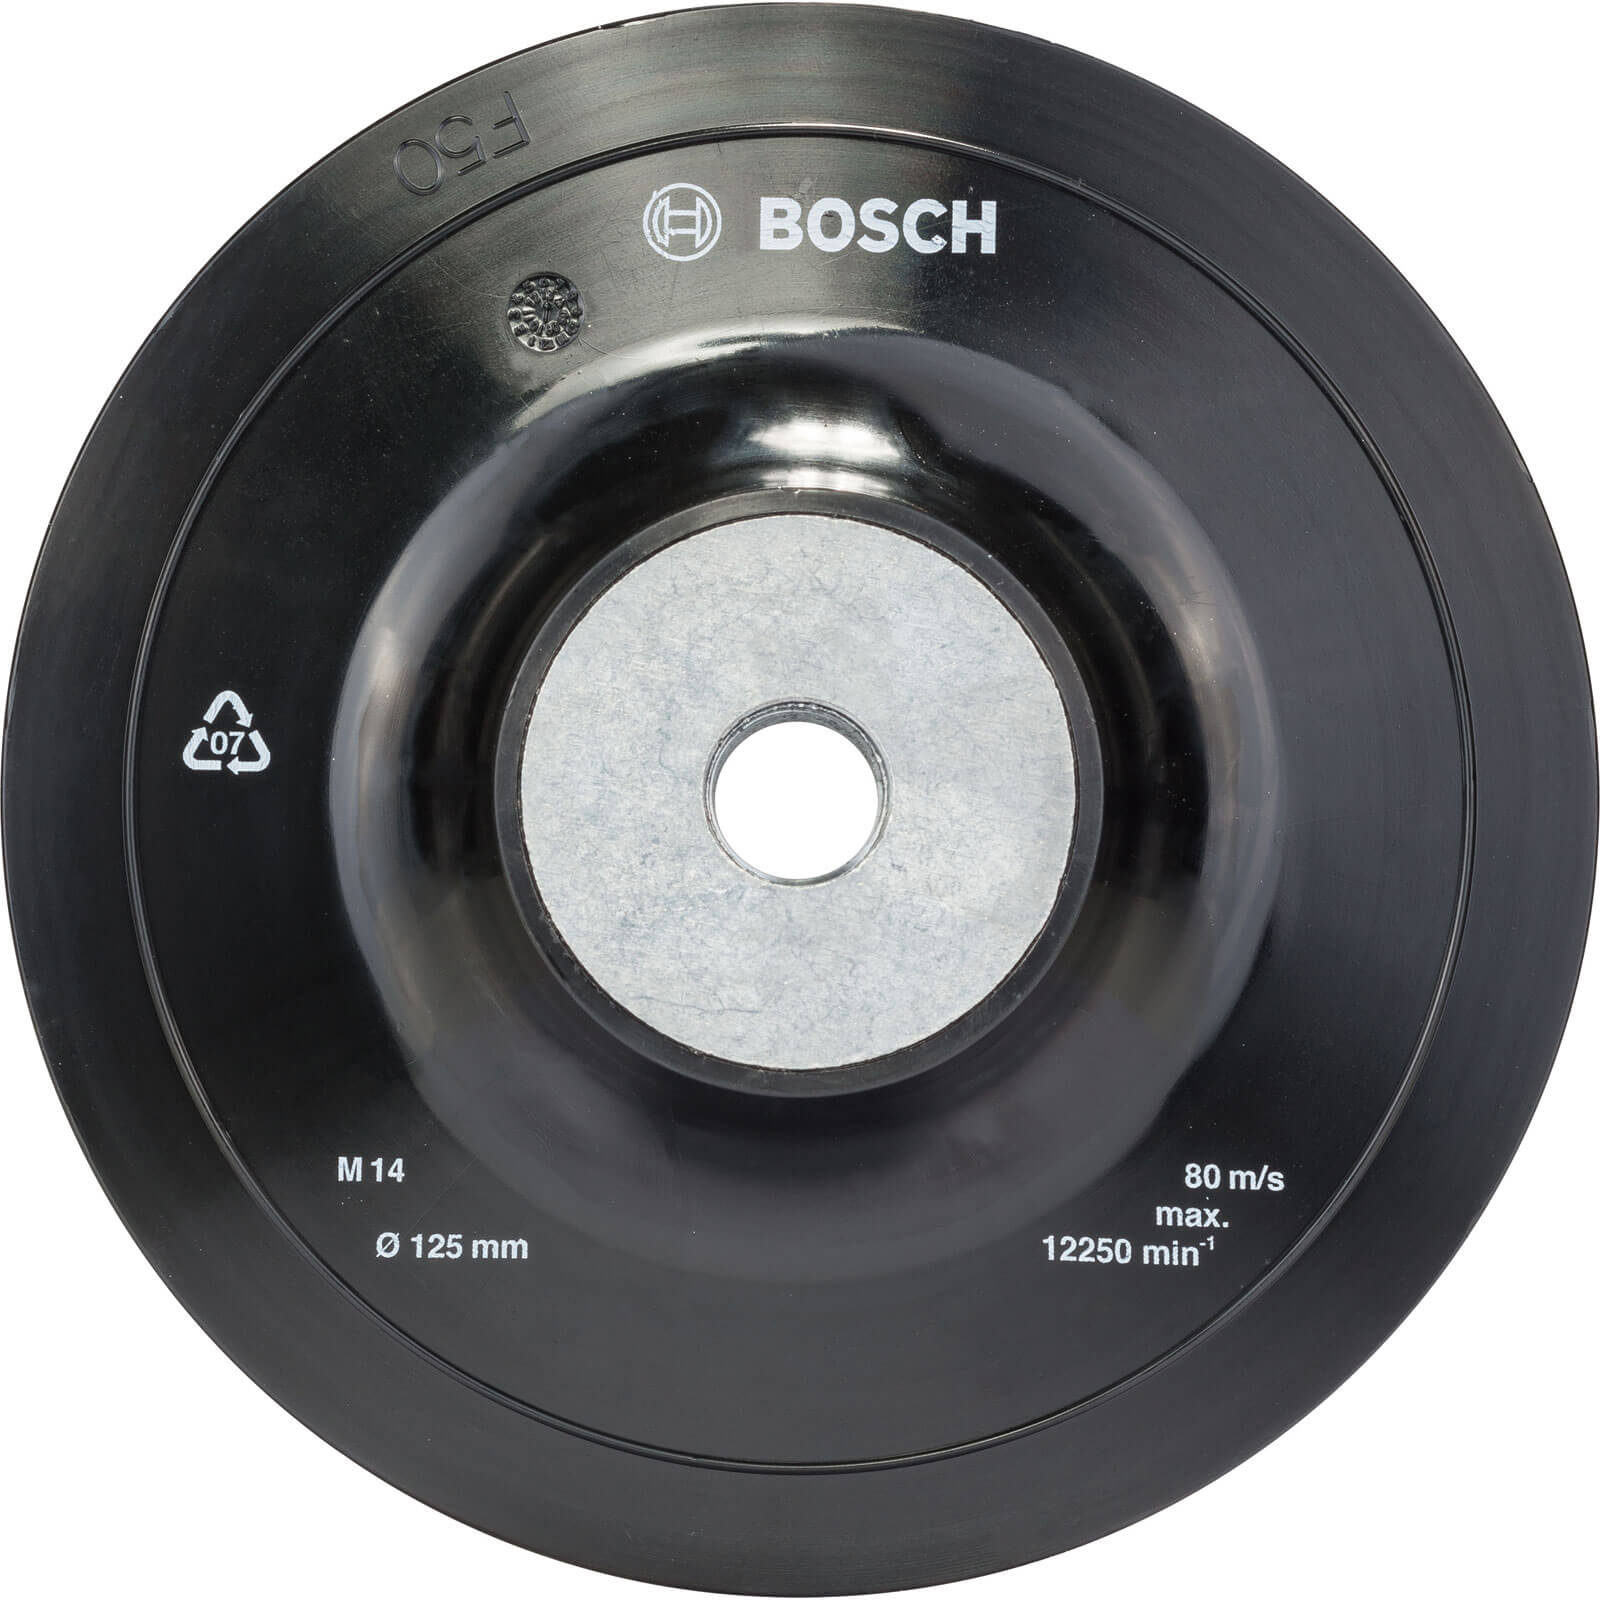 Image of Bosch M14 Angle Grinder Backing Pad 125mm